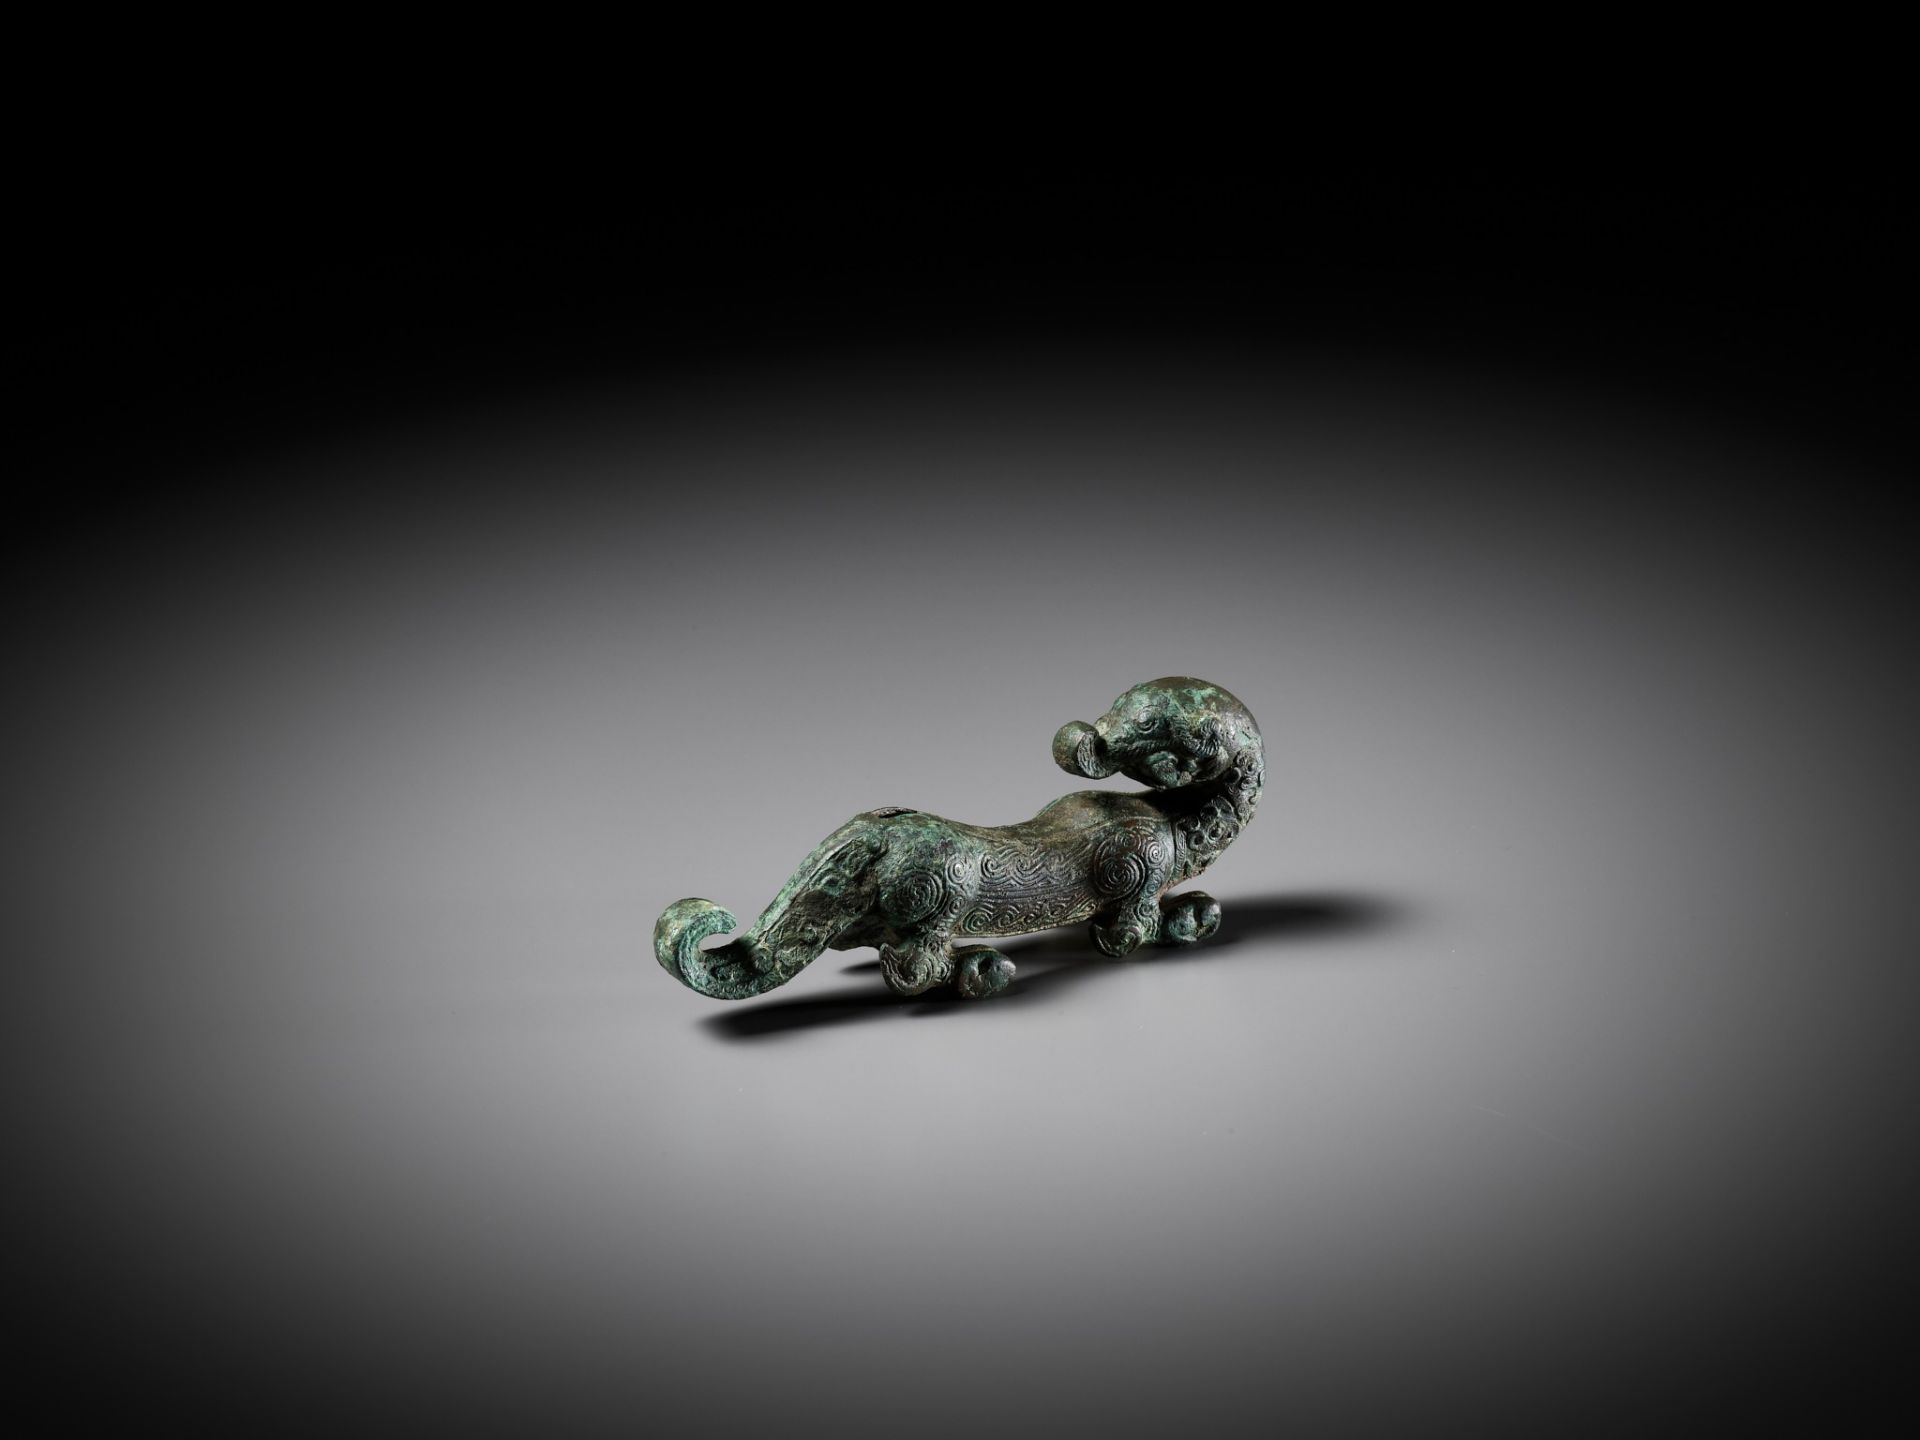 A SUPERB BRONZE FIGURE OF A DRAGON, EASTERN ZHOU DYNASTY, CHINA, 770-256 BC - Image 3 of 25